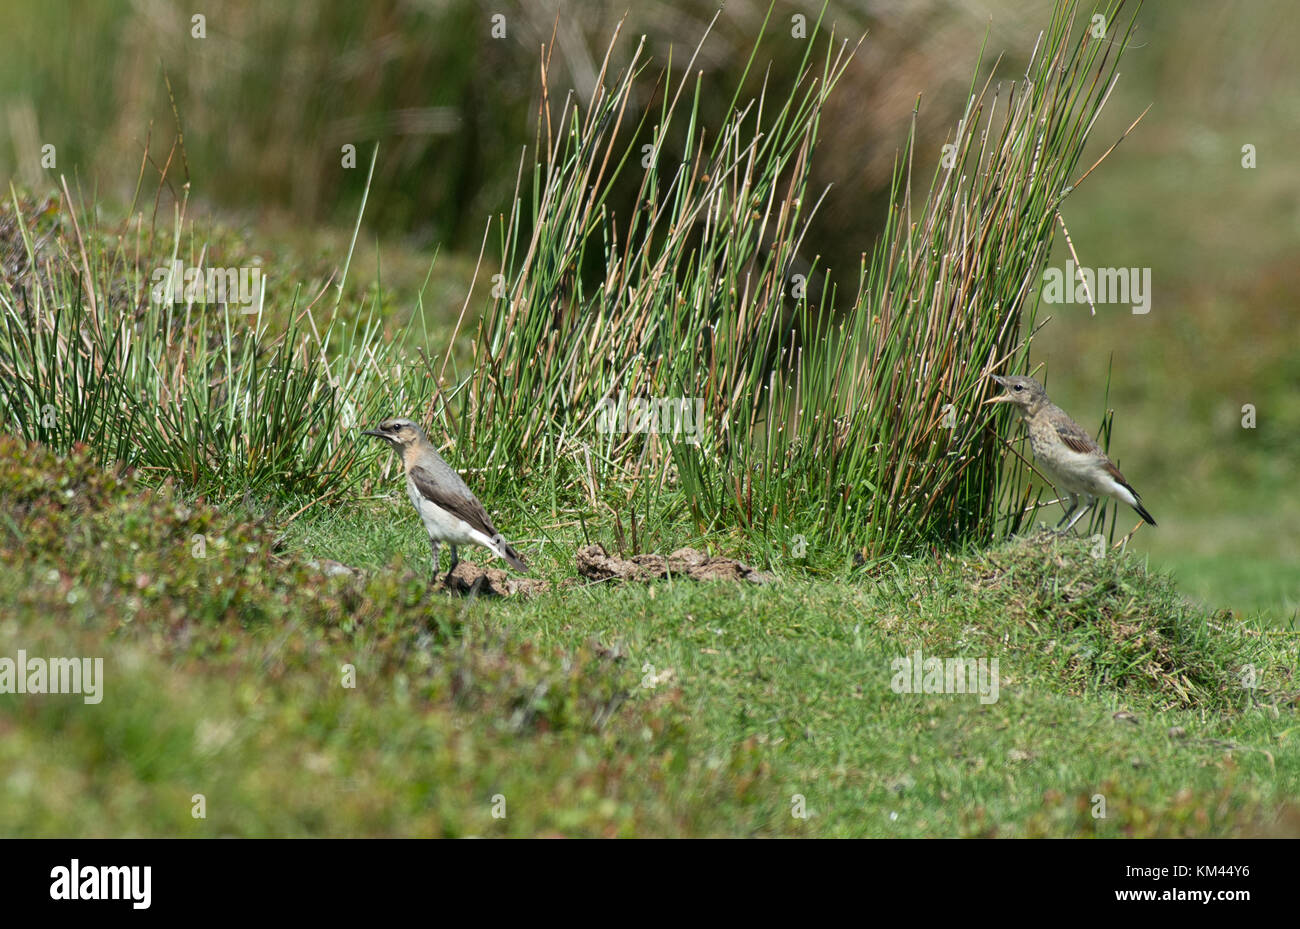 Juvenile Wheatears-Oenanthe oenanthe begs parent for food. Uk Stock Photo